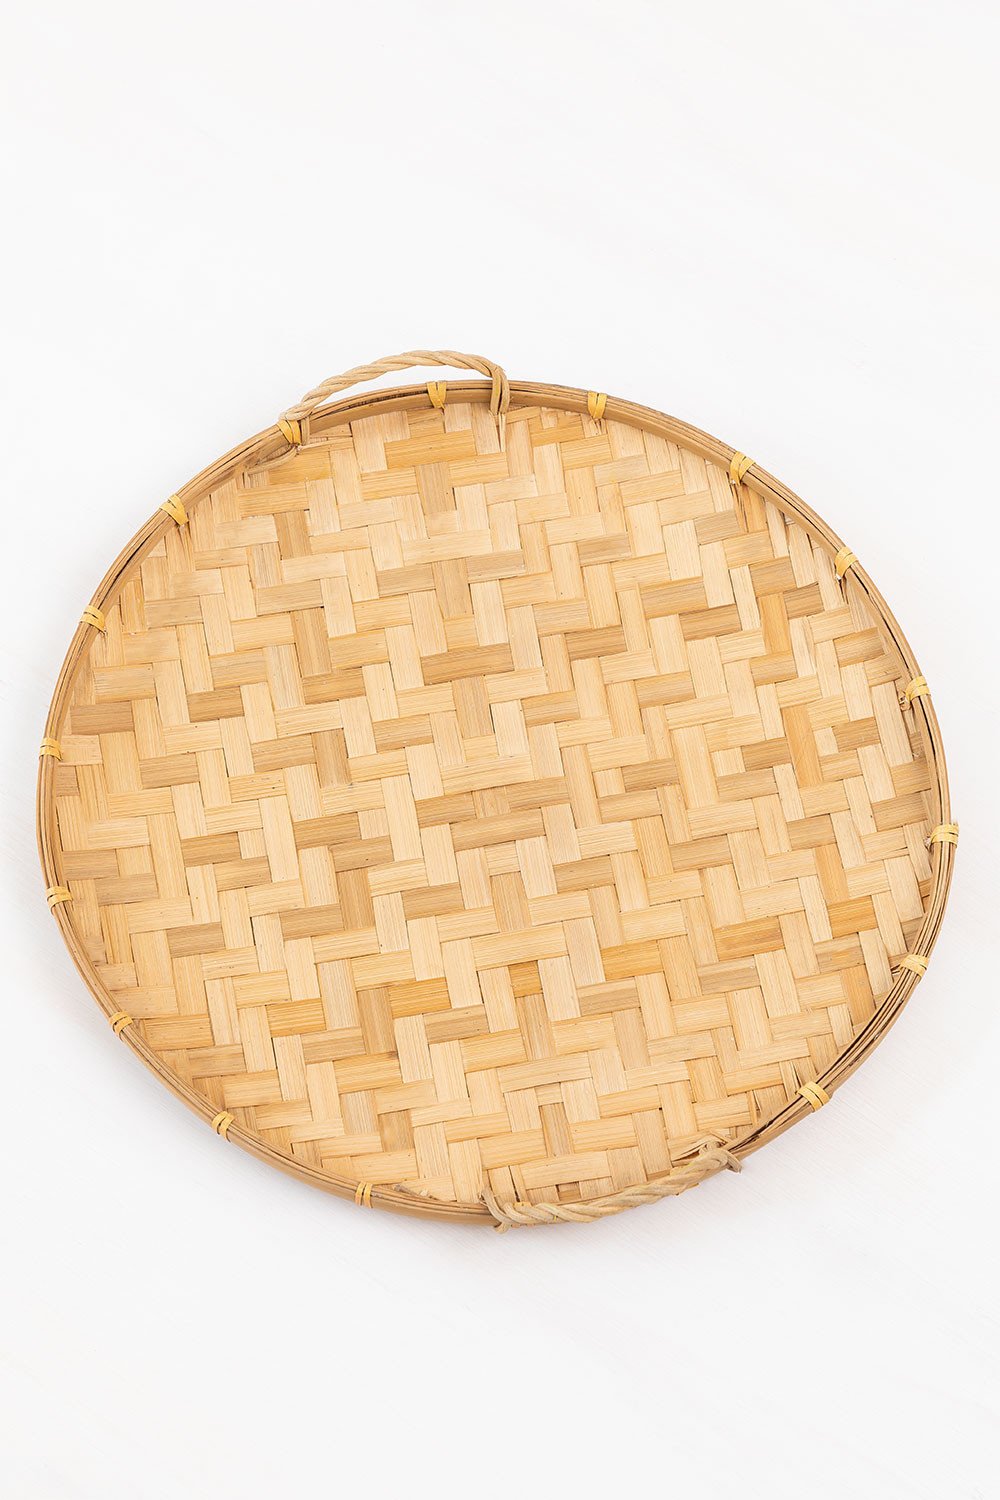 Decorative Tray in Sikar Bamboo, gallery image 1